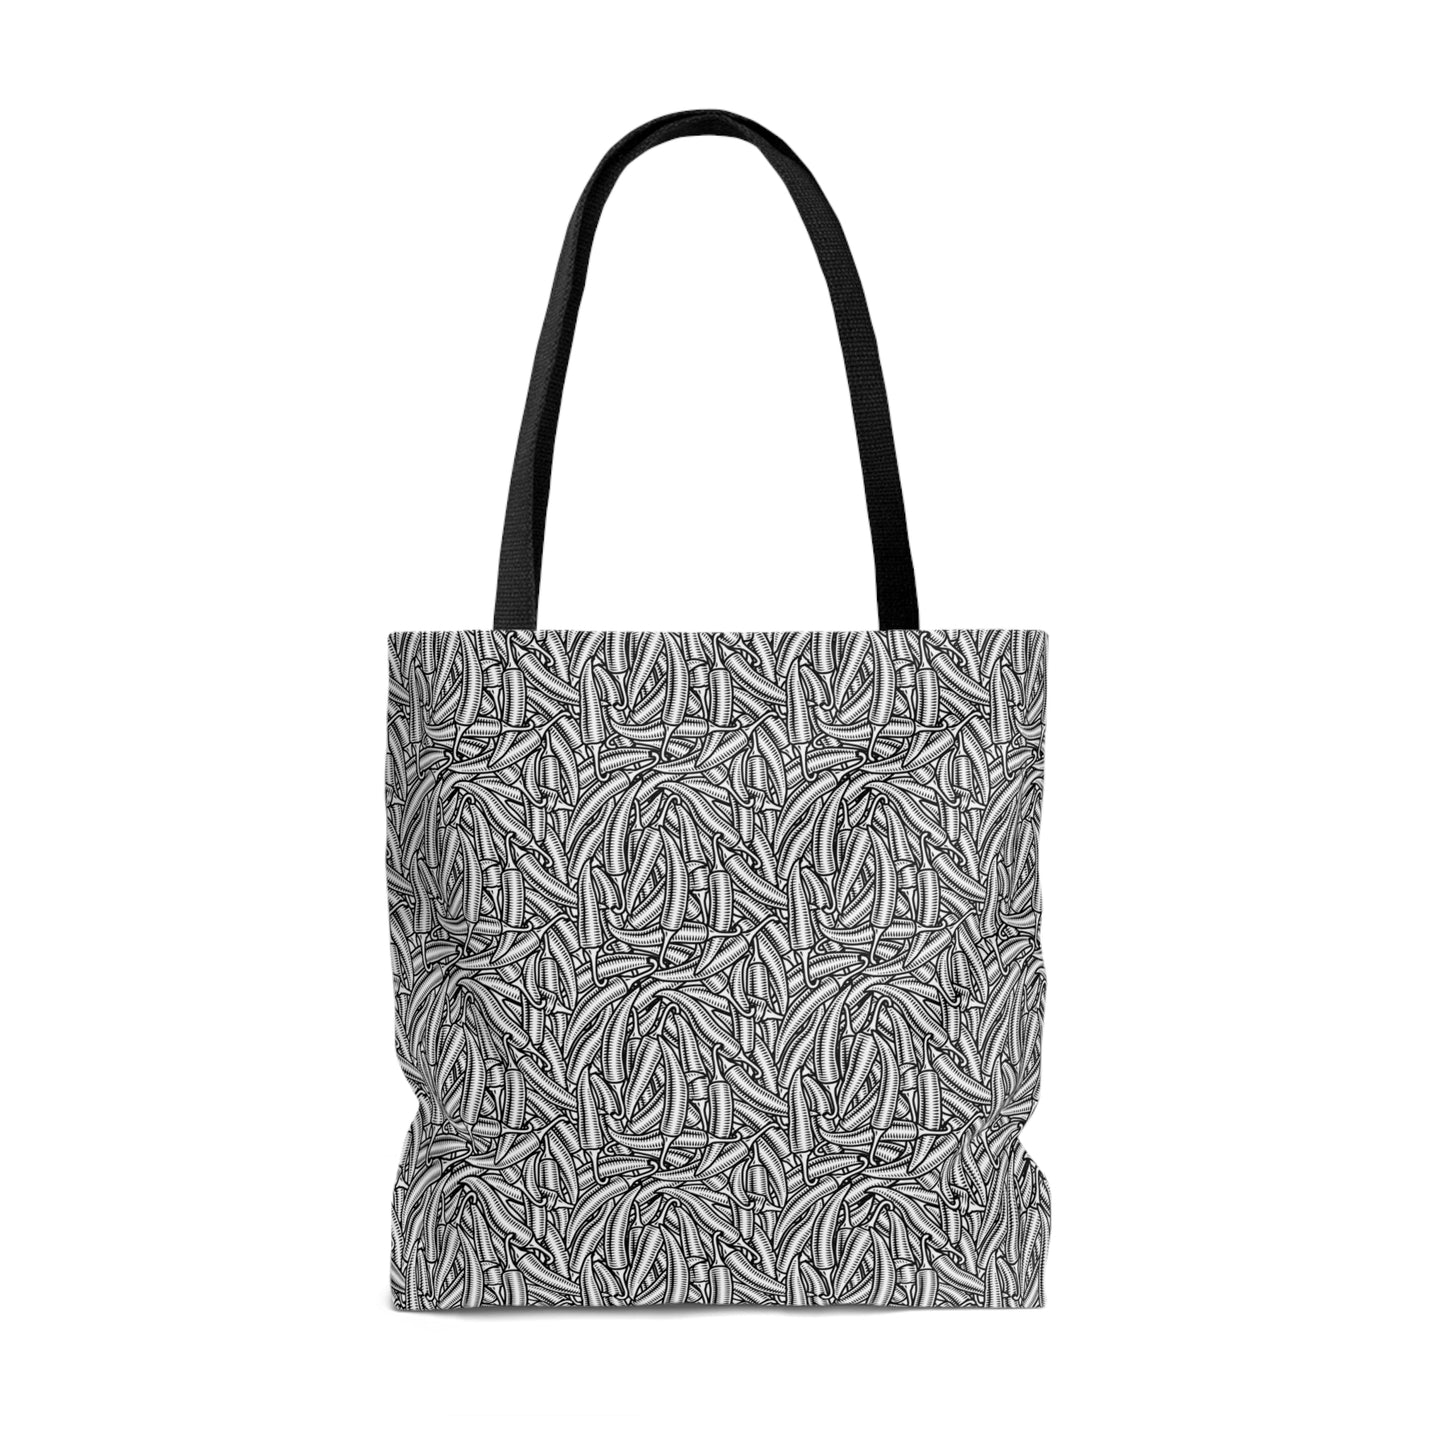 Add a little heat to your lifestyle - Tote Bag - Light Gray